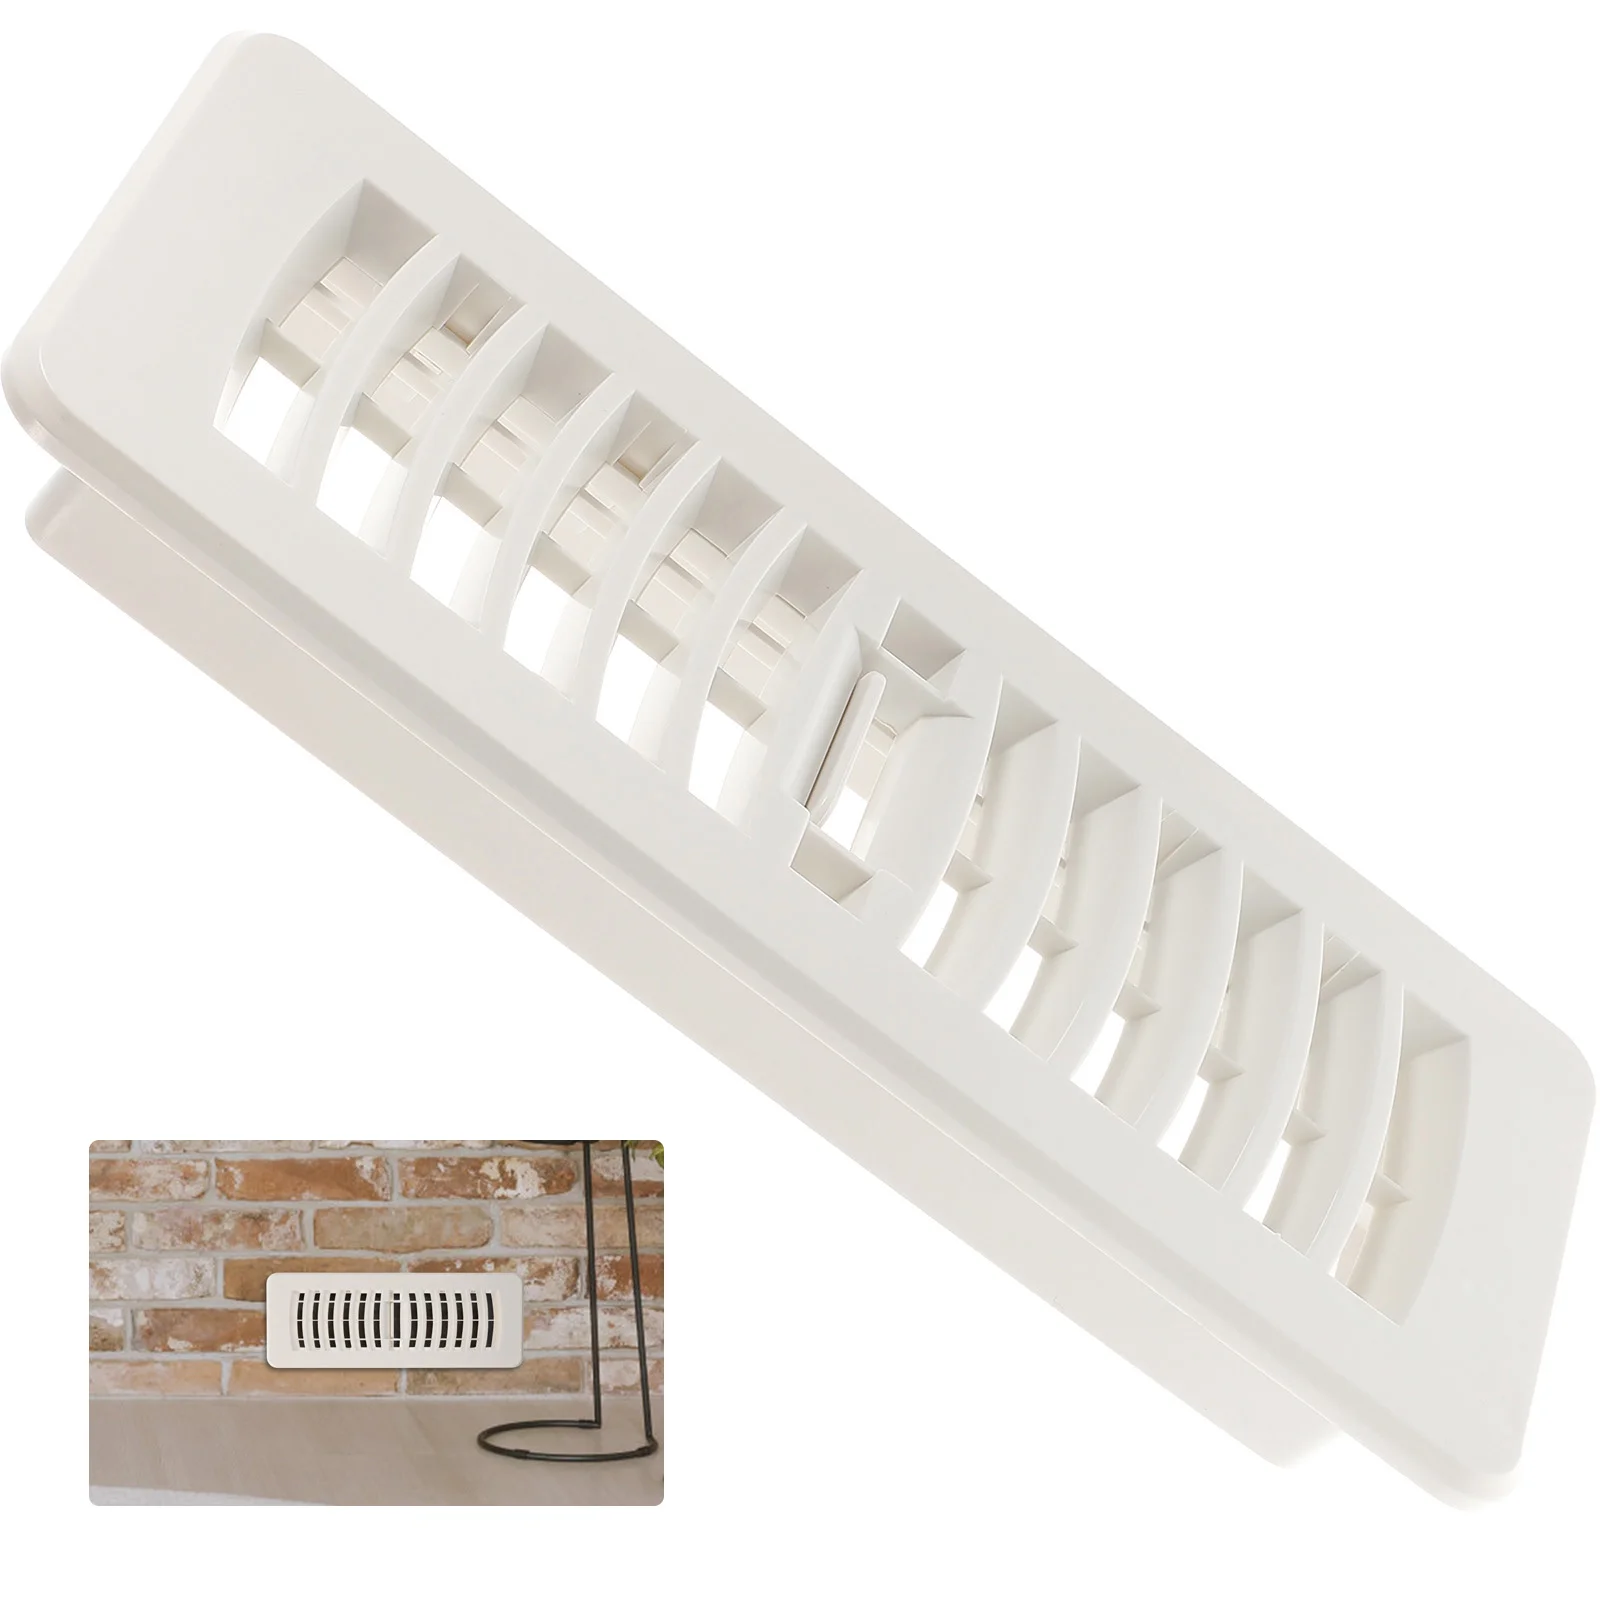 

Baseboard Register Exhaust Grill Air Conditioner Floor Vent Cover HVAC System Conditioning Household Ventilation White Plastic